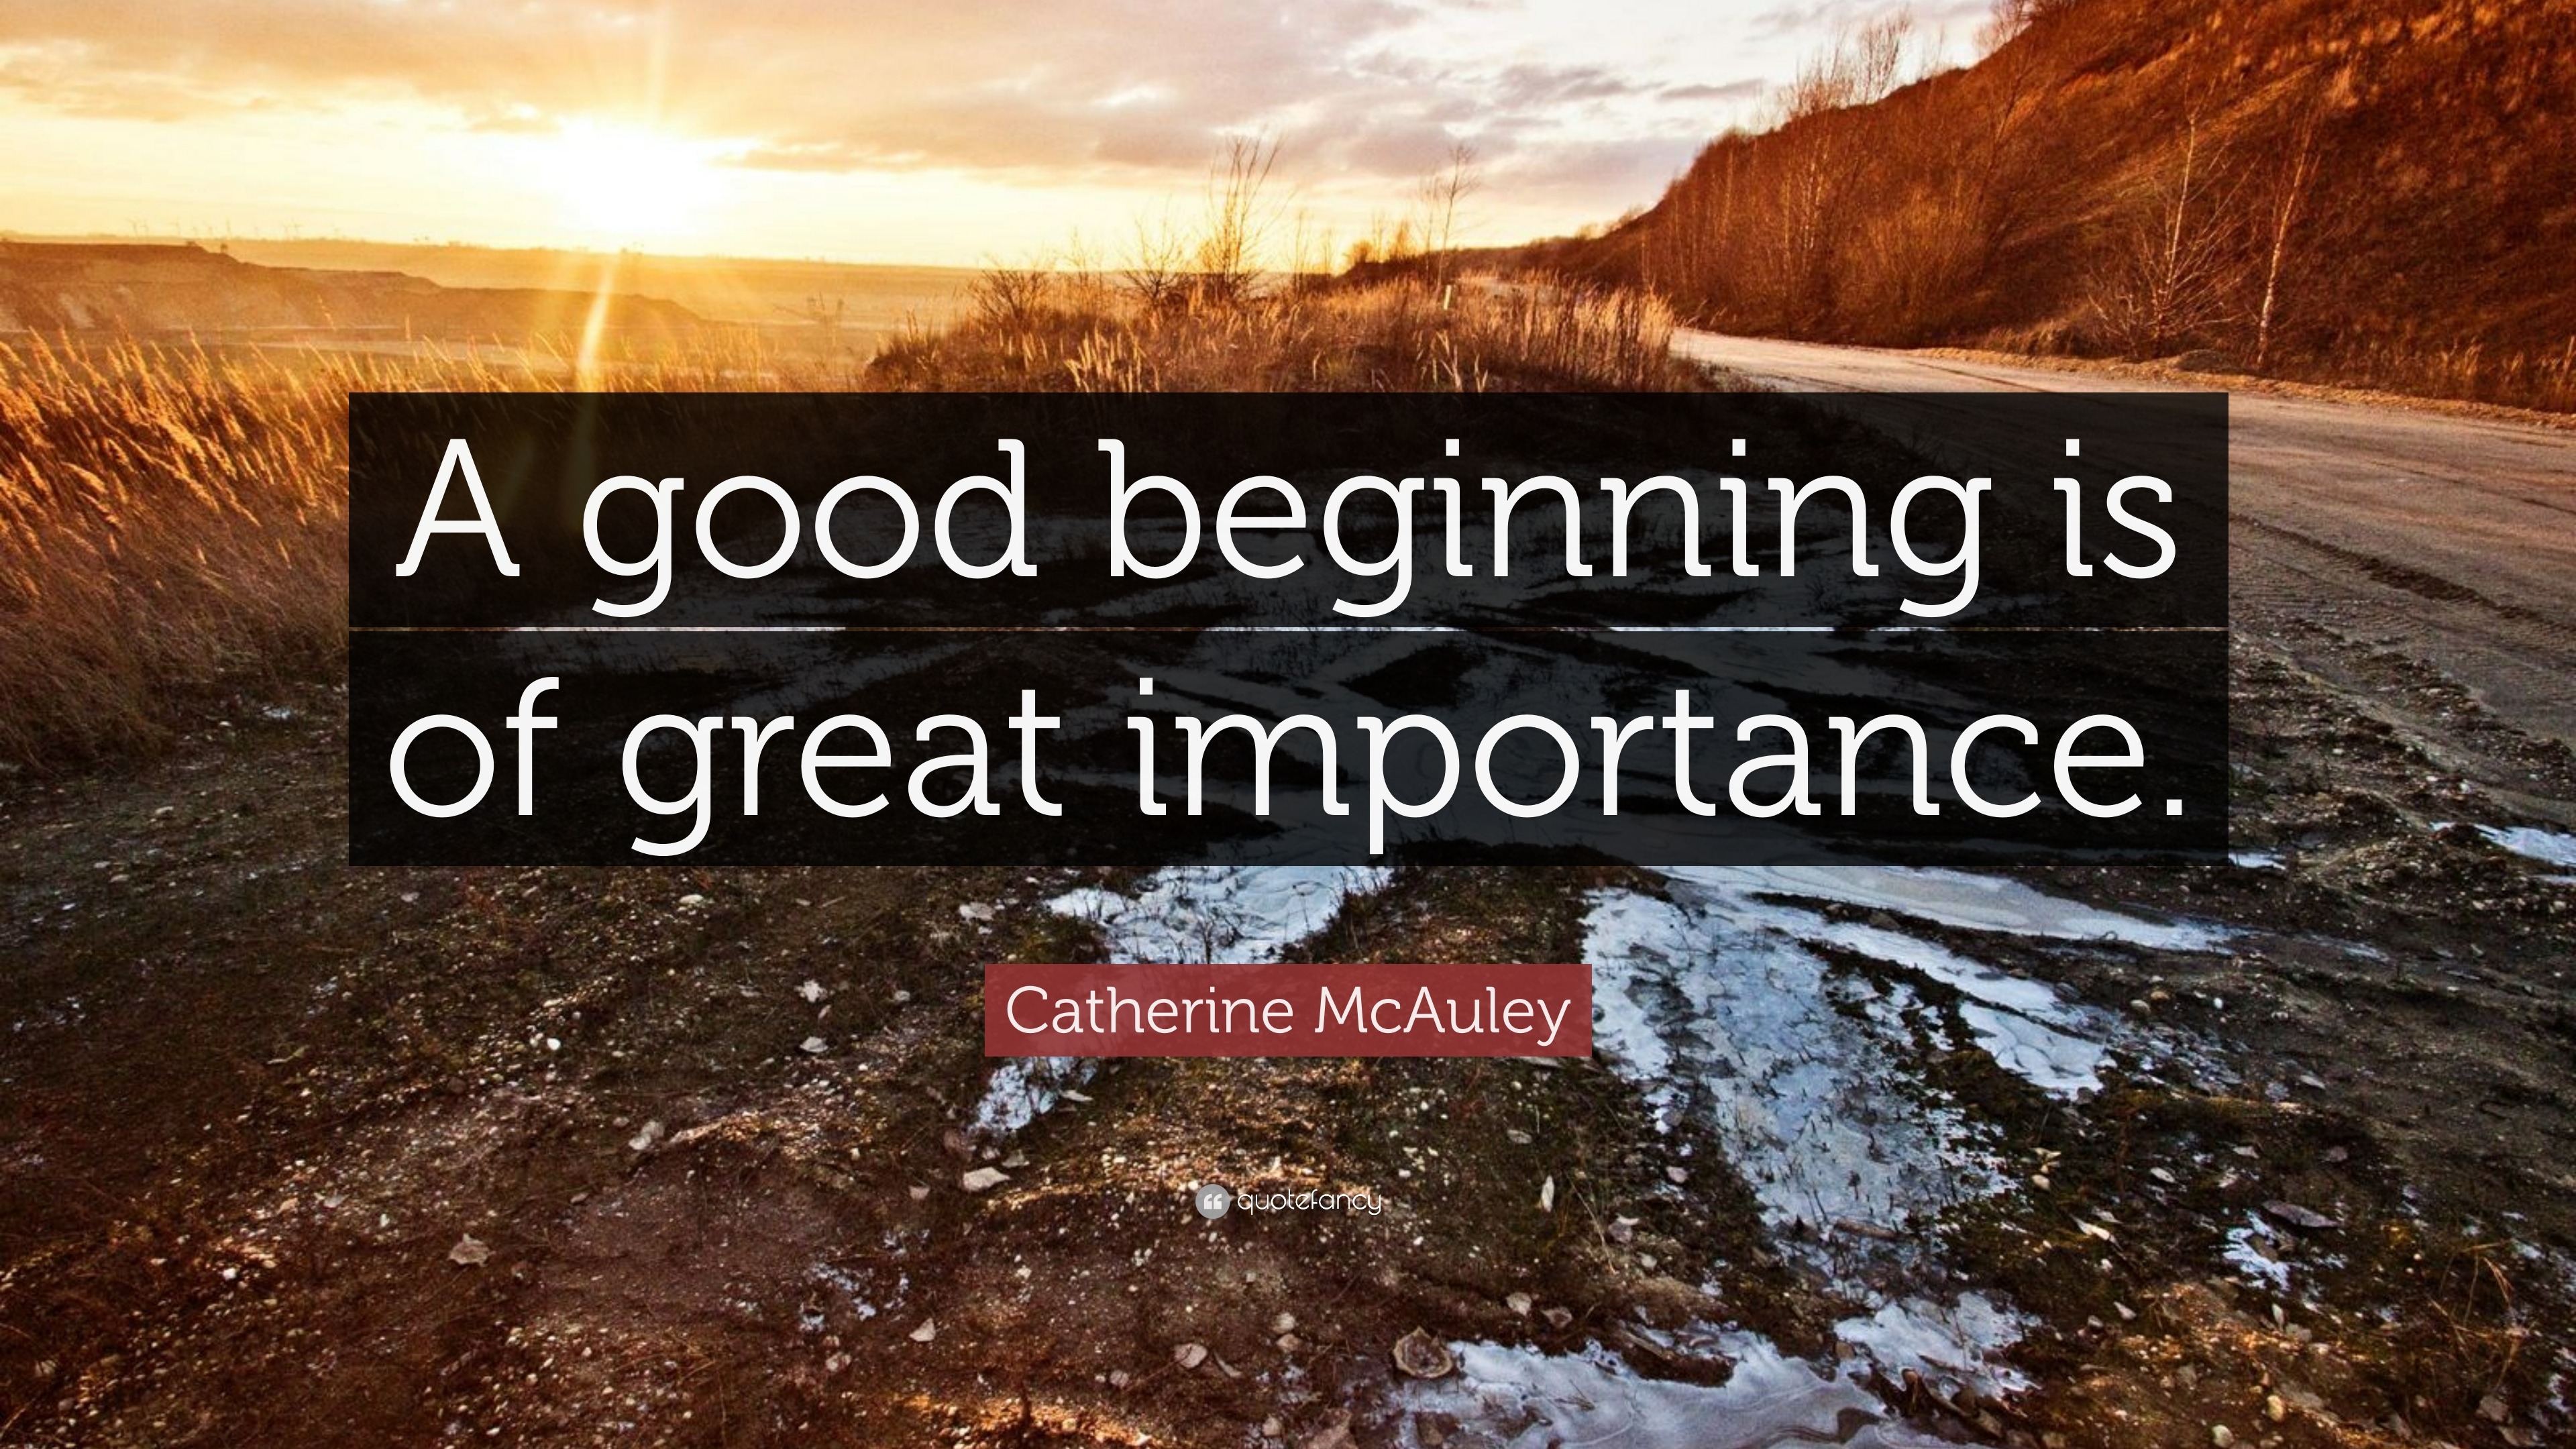 catherine-mcauley-quote-a-good-beginning-is-of-great-importance